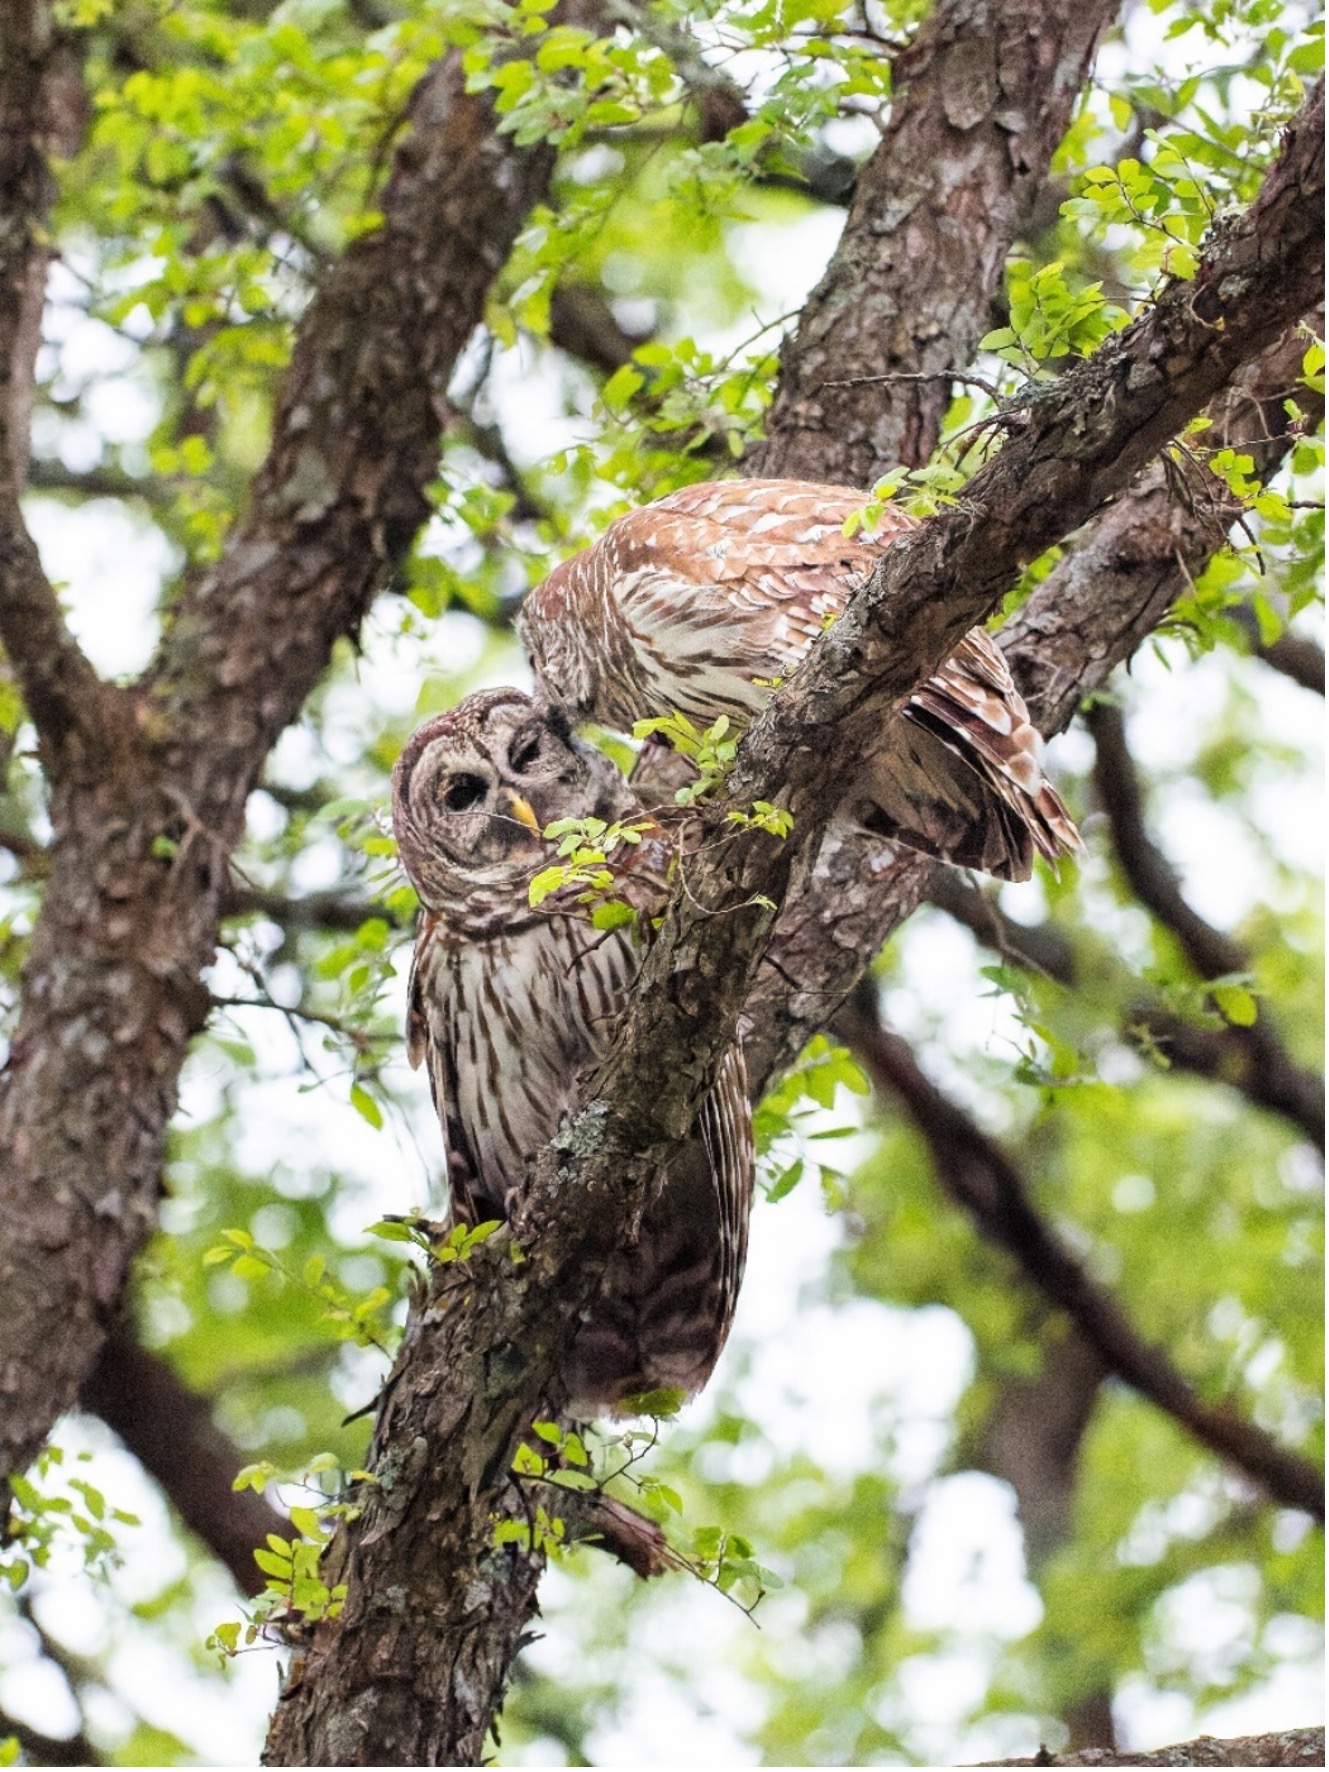 Mating Pair of Barred Owls